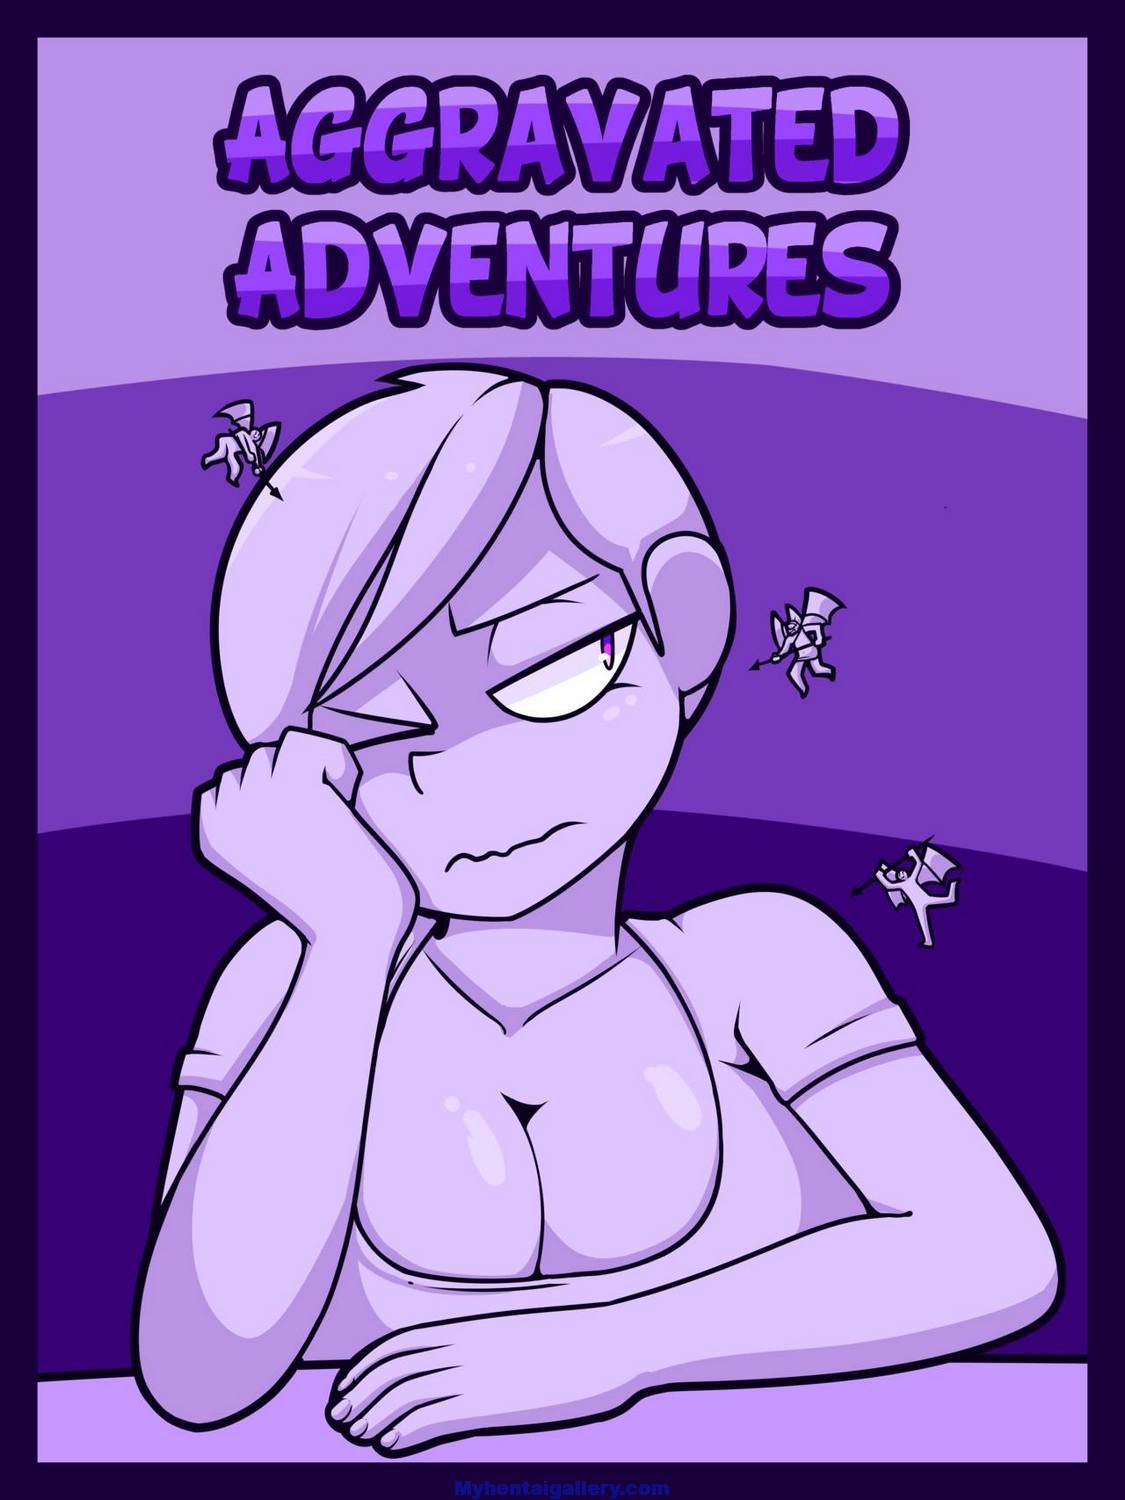 Cover Aggravated Adventures